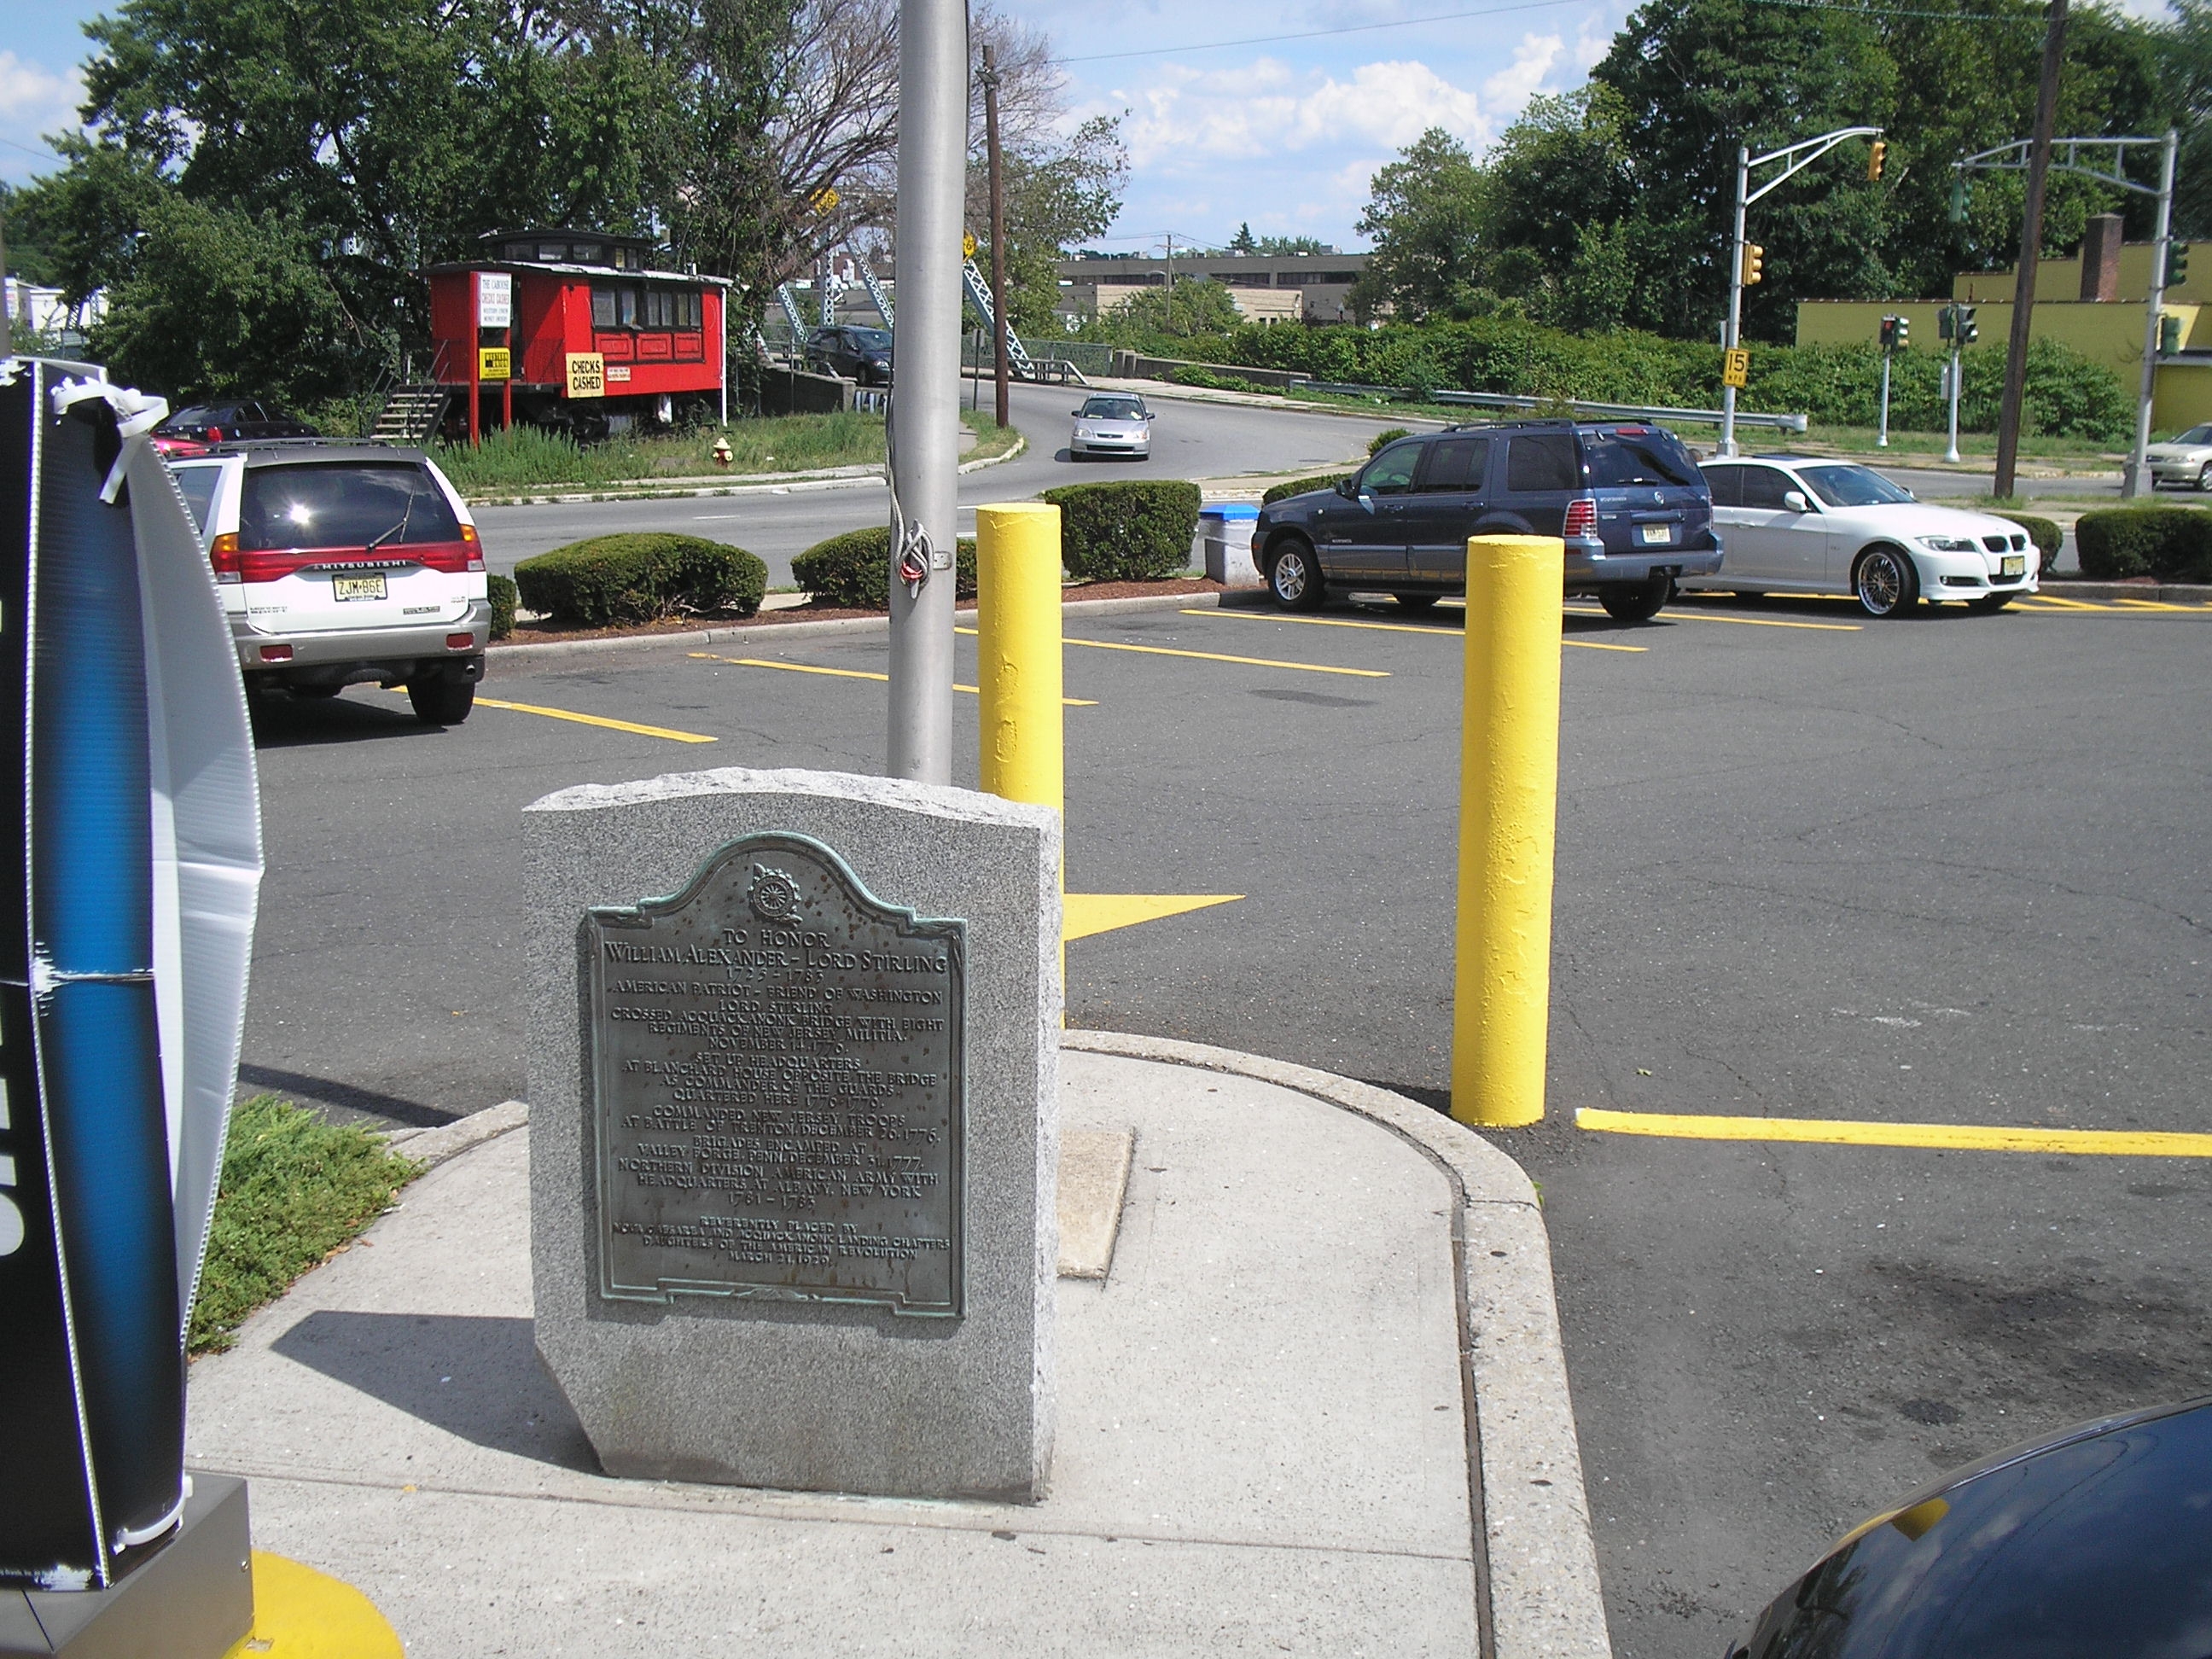 Lord Stirling Marker in Passaic